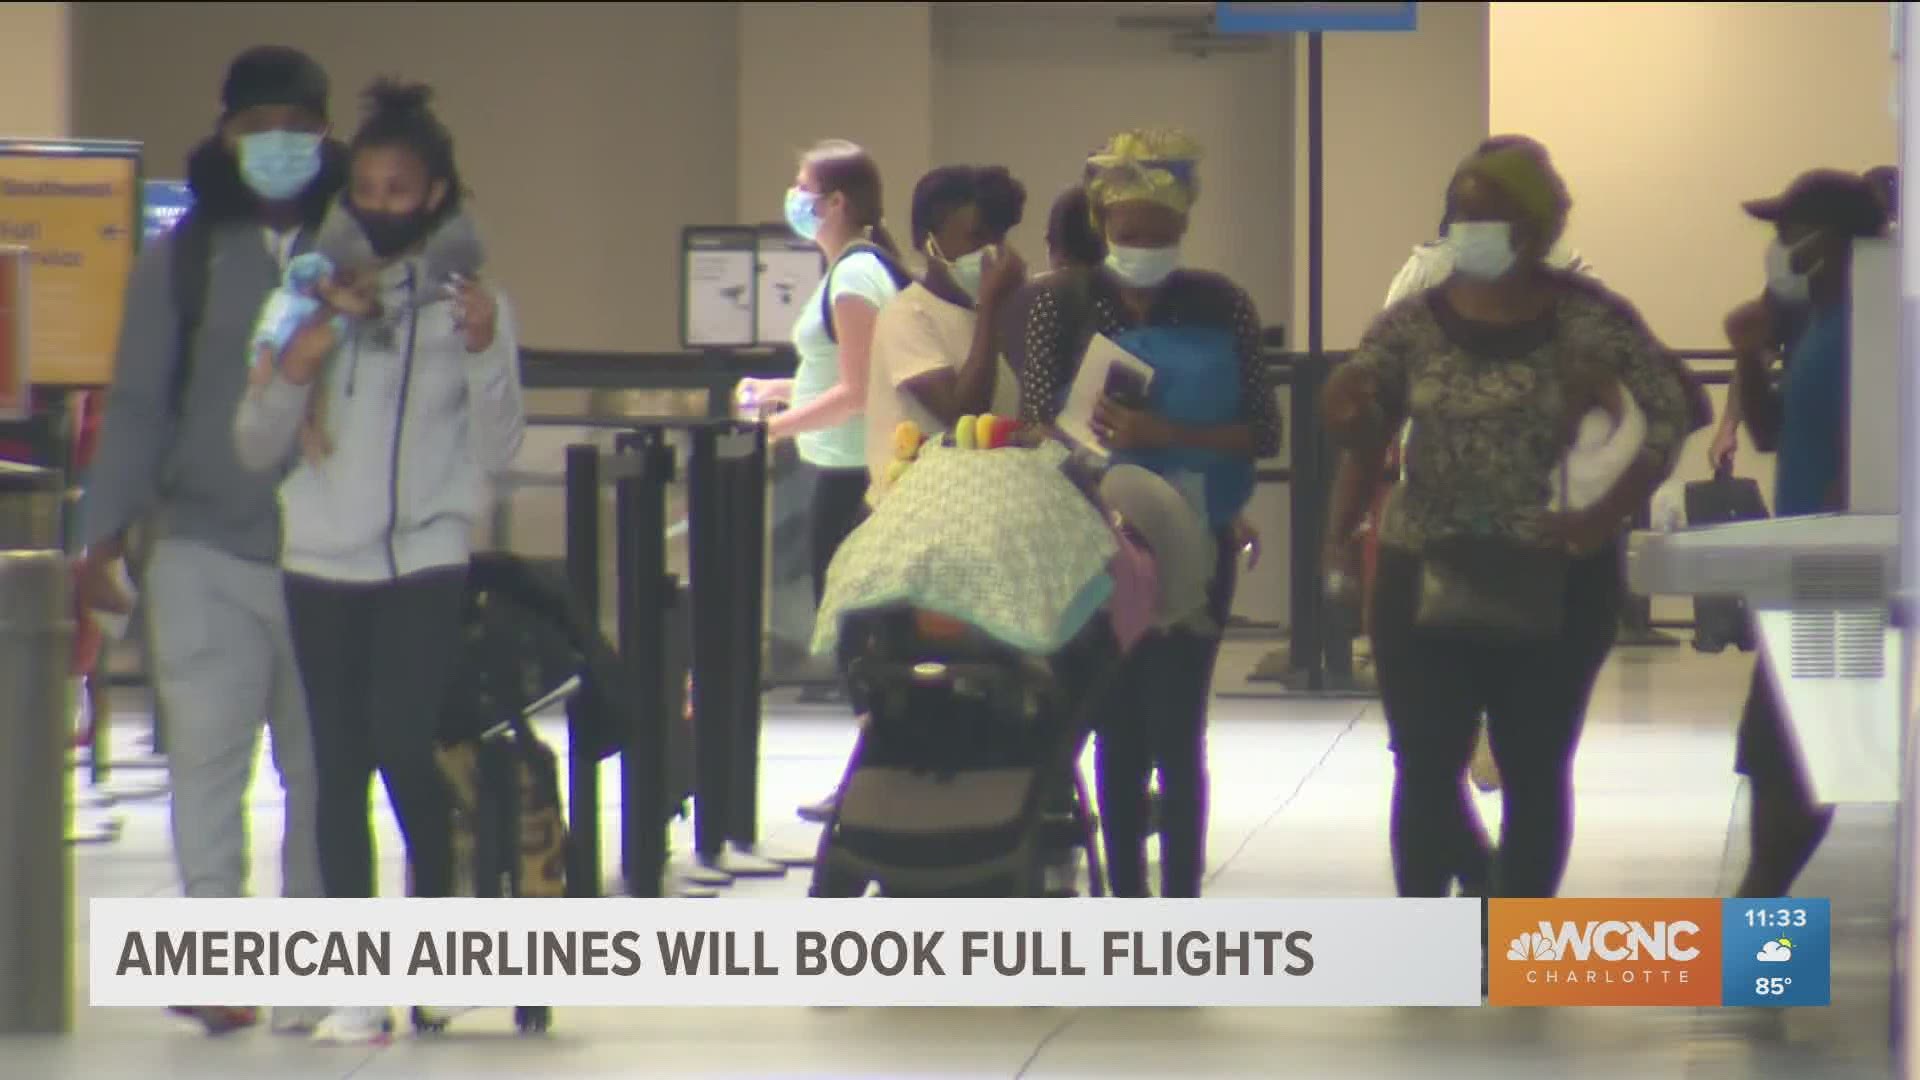 The airline currently has travel waivers allowing customers to rebook without a change fee. That's for any travel through September 30 of this year.